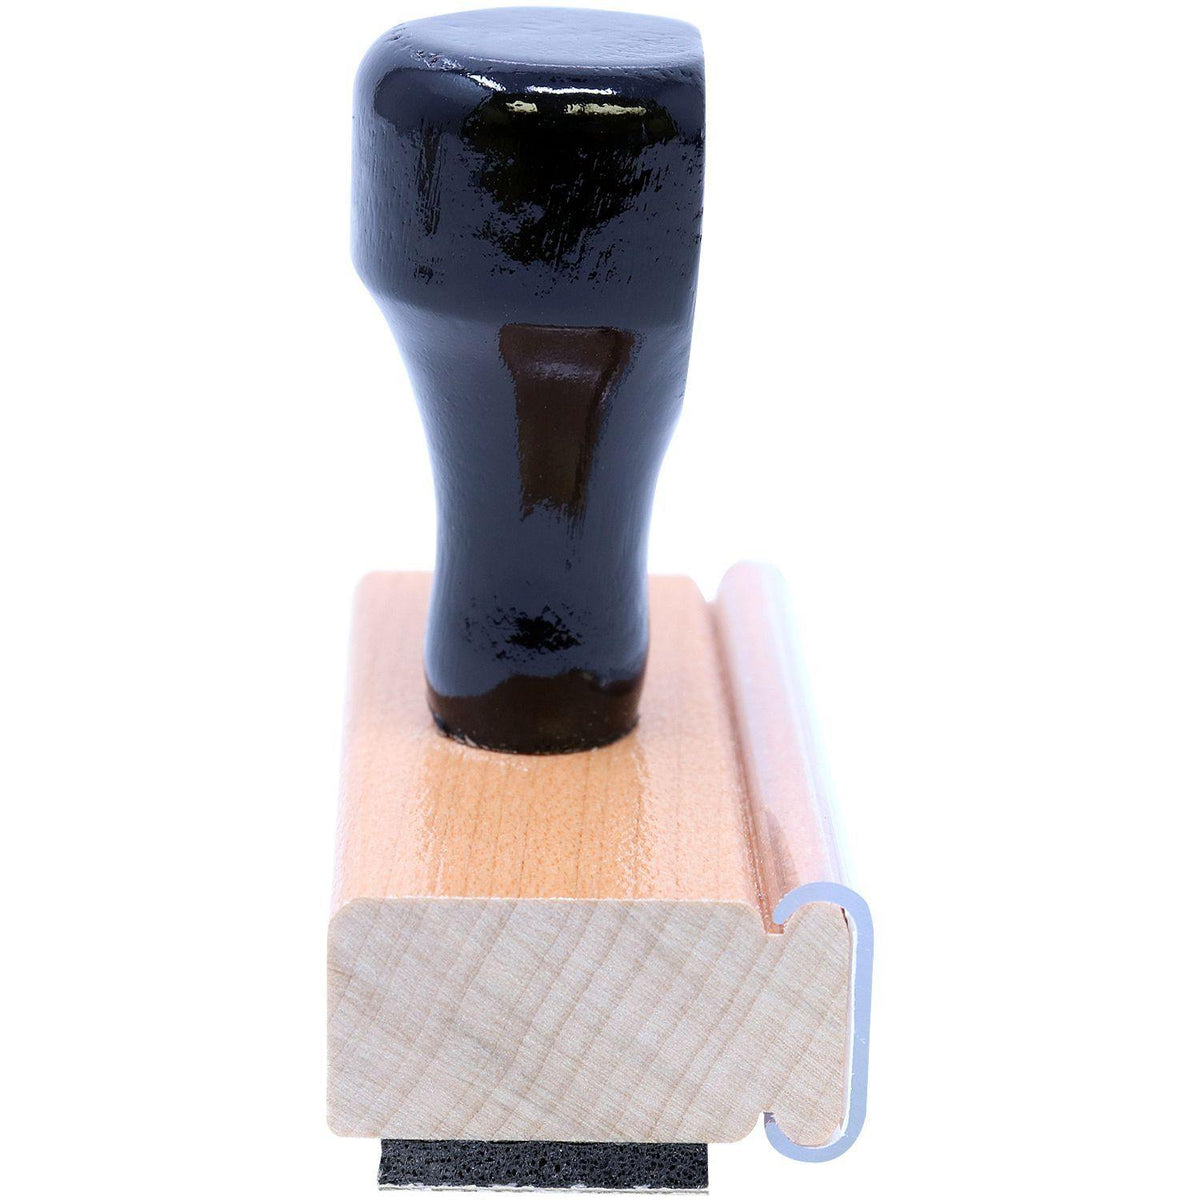 Round Happy Face Rubber Stamp - Engineer Seal Stamps - Brand_Acorn, Impression Size_Small, Stamp Type_Regular Stamp, Type of Use_General, Type of Use_Teacher